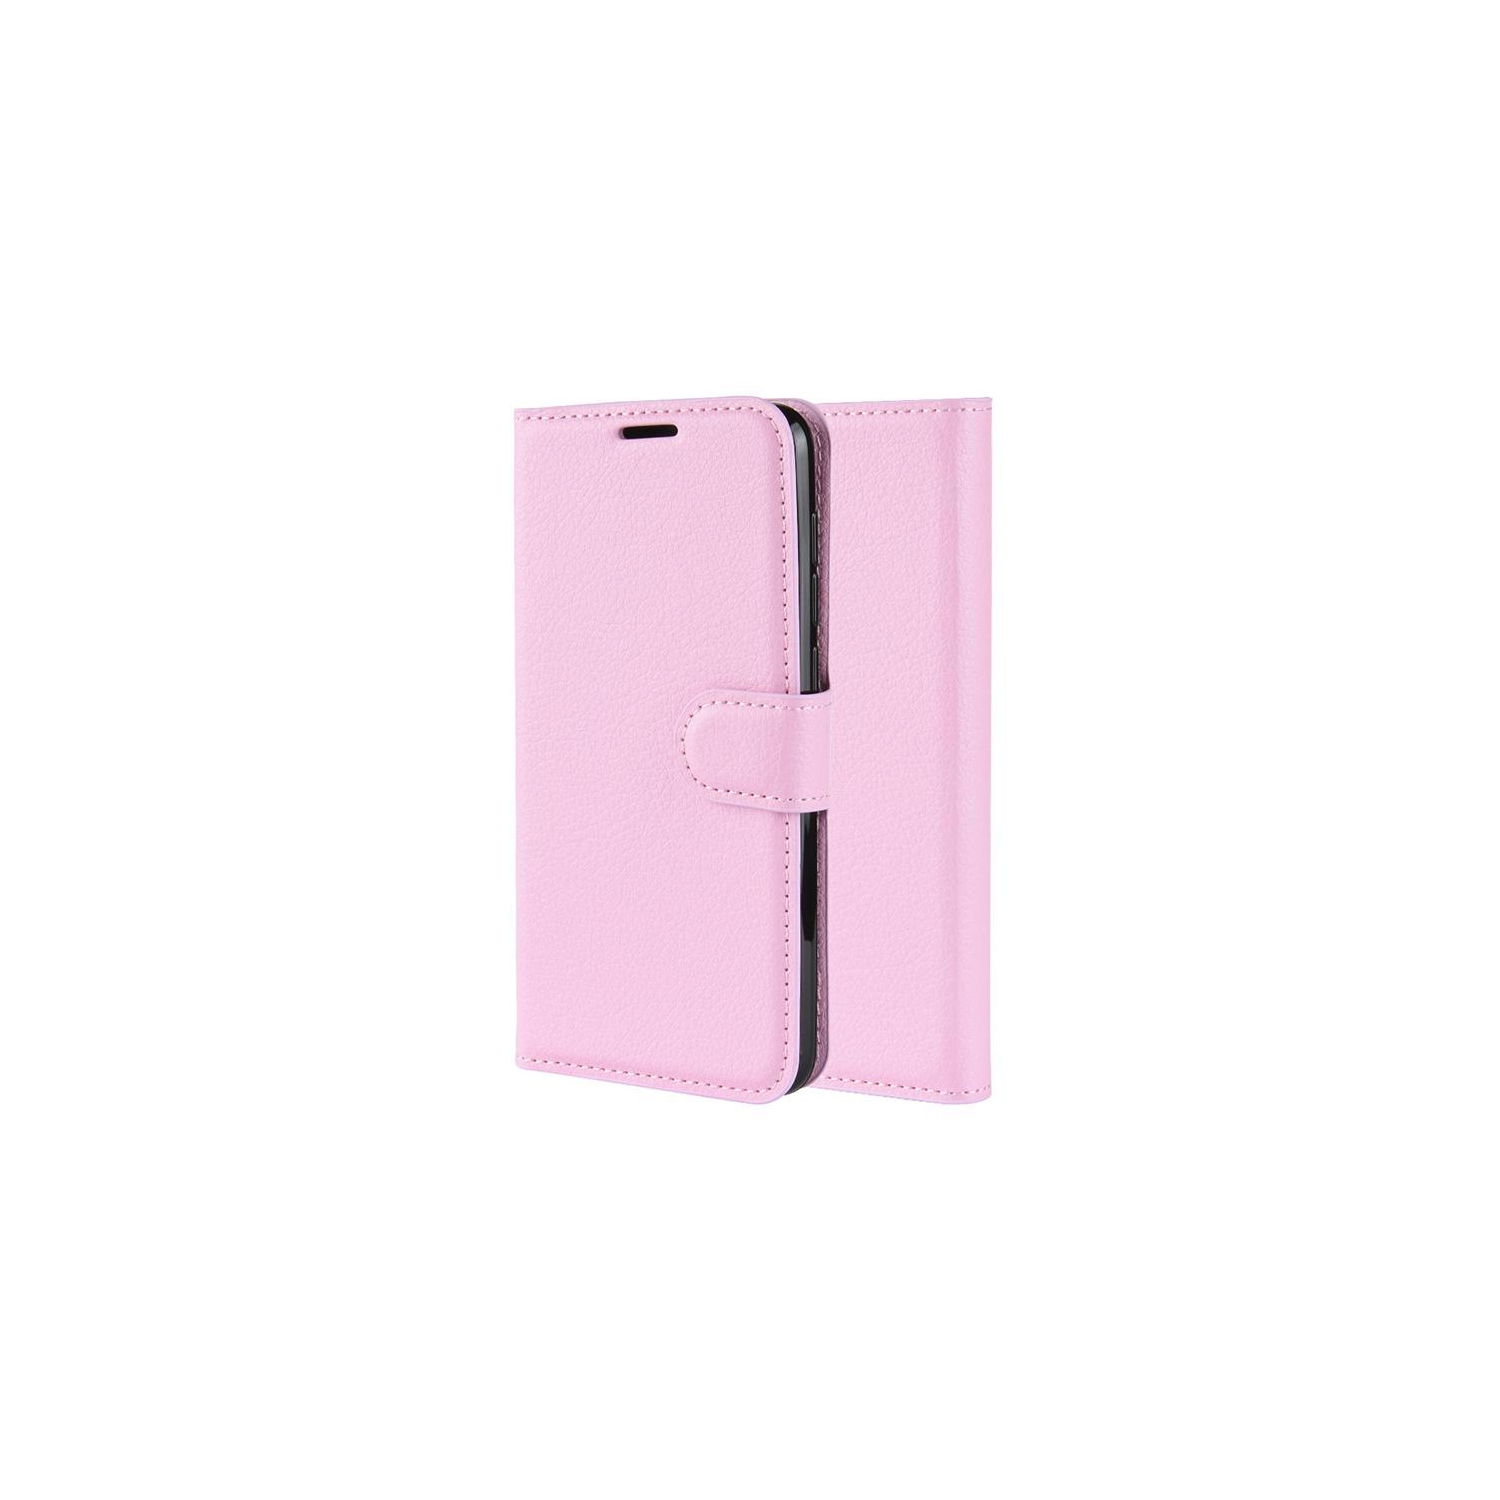 PANDACO Pink Leather Wallet Case for Samsung Galaxy A20